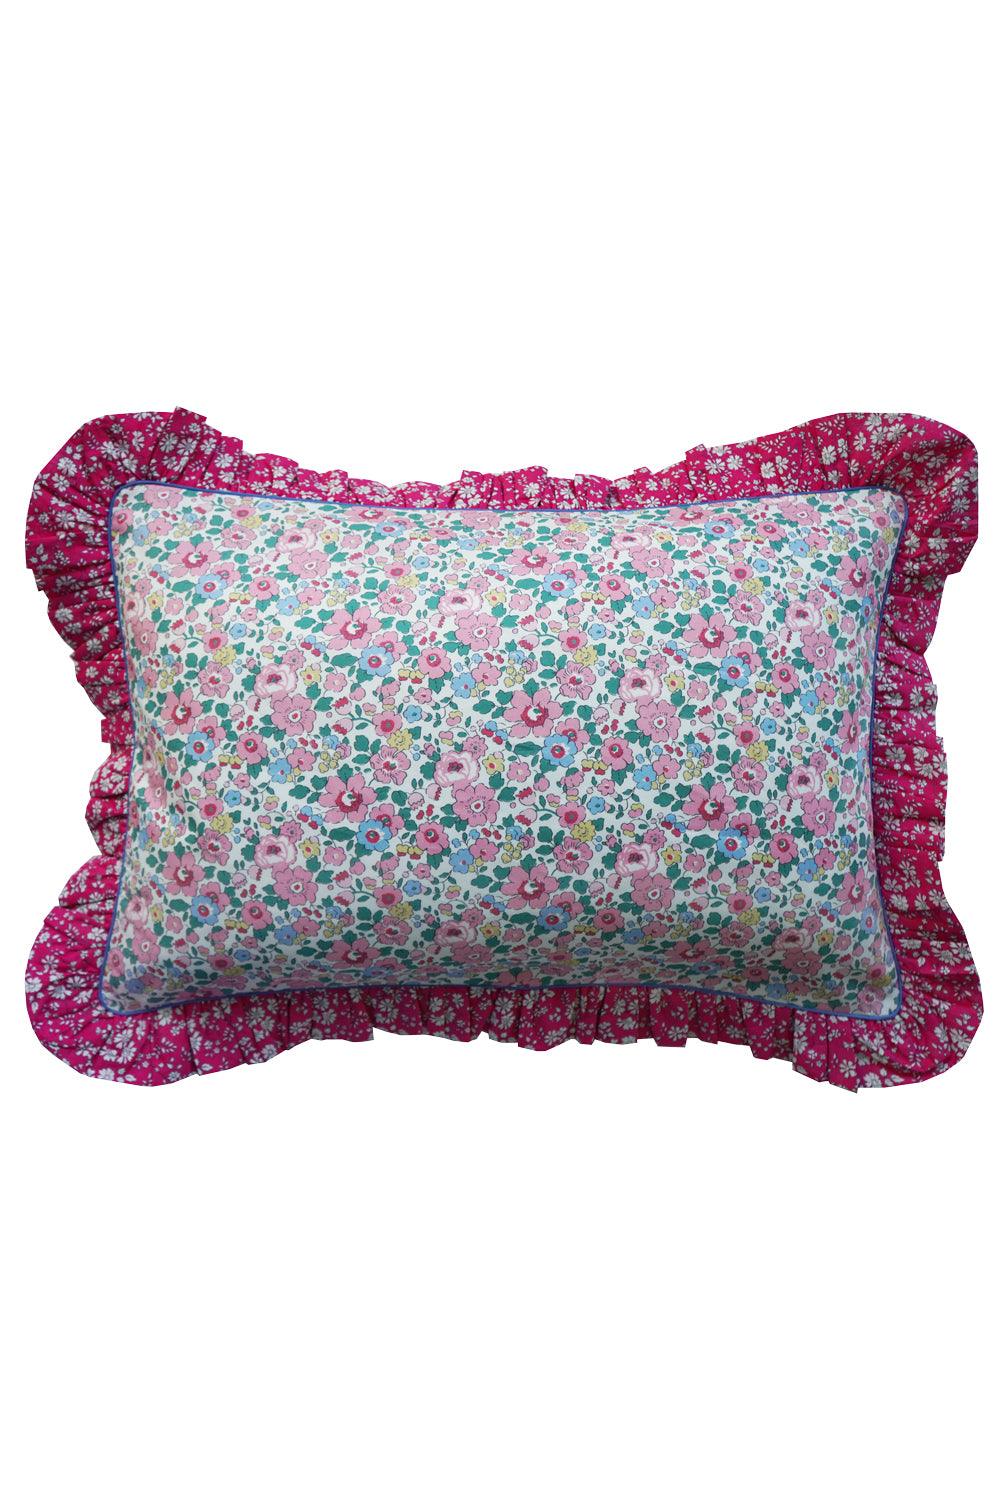 Oblong Piped Ruffle Cushion made with Liberty Fabric BETSY CANDY FLOSS - Coco & Wolf